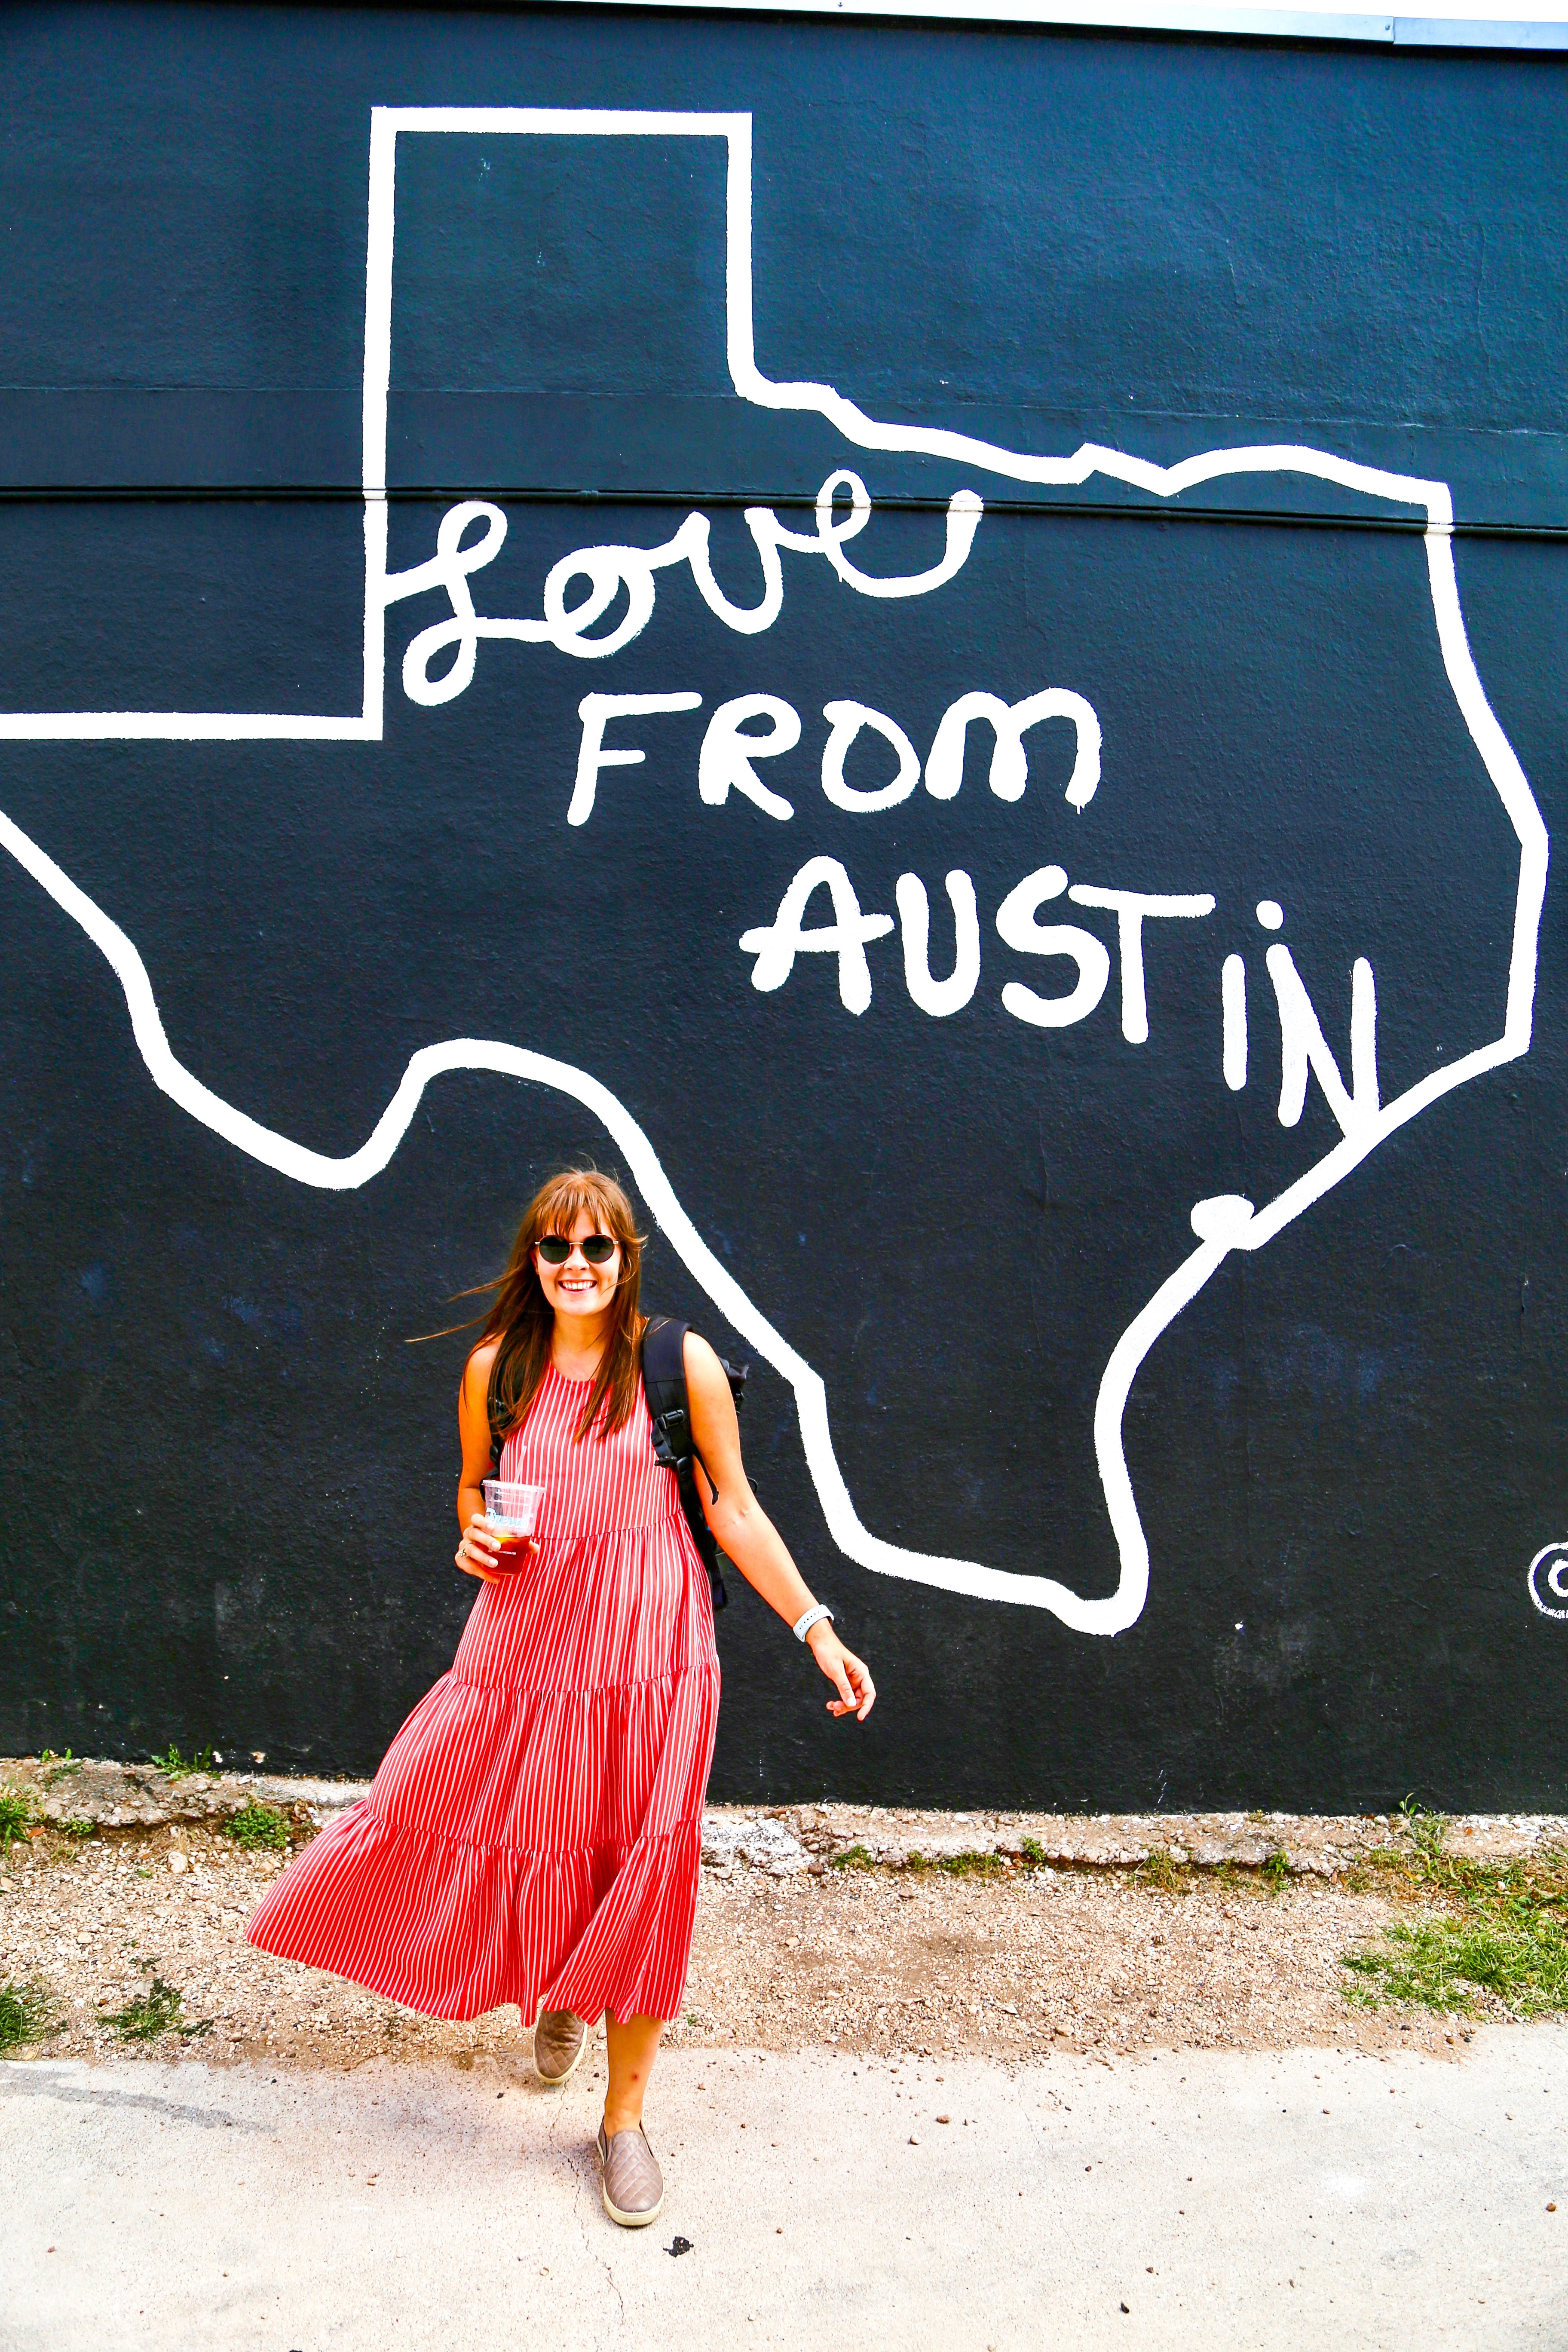 Top things to do in Austin, Texas; weekend getaway in Austin Texas, SXSW, Austin City Limits (ACL), outdoorsy things to do in Austin, Texas; where to eat and drink and Austin, Texas, where to stay in Austin texas, cute hotels in Austin, boutique hotels in Austin